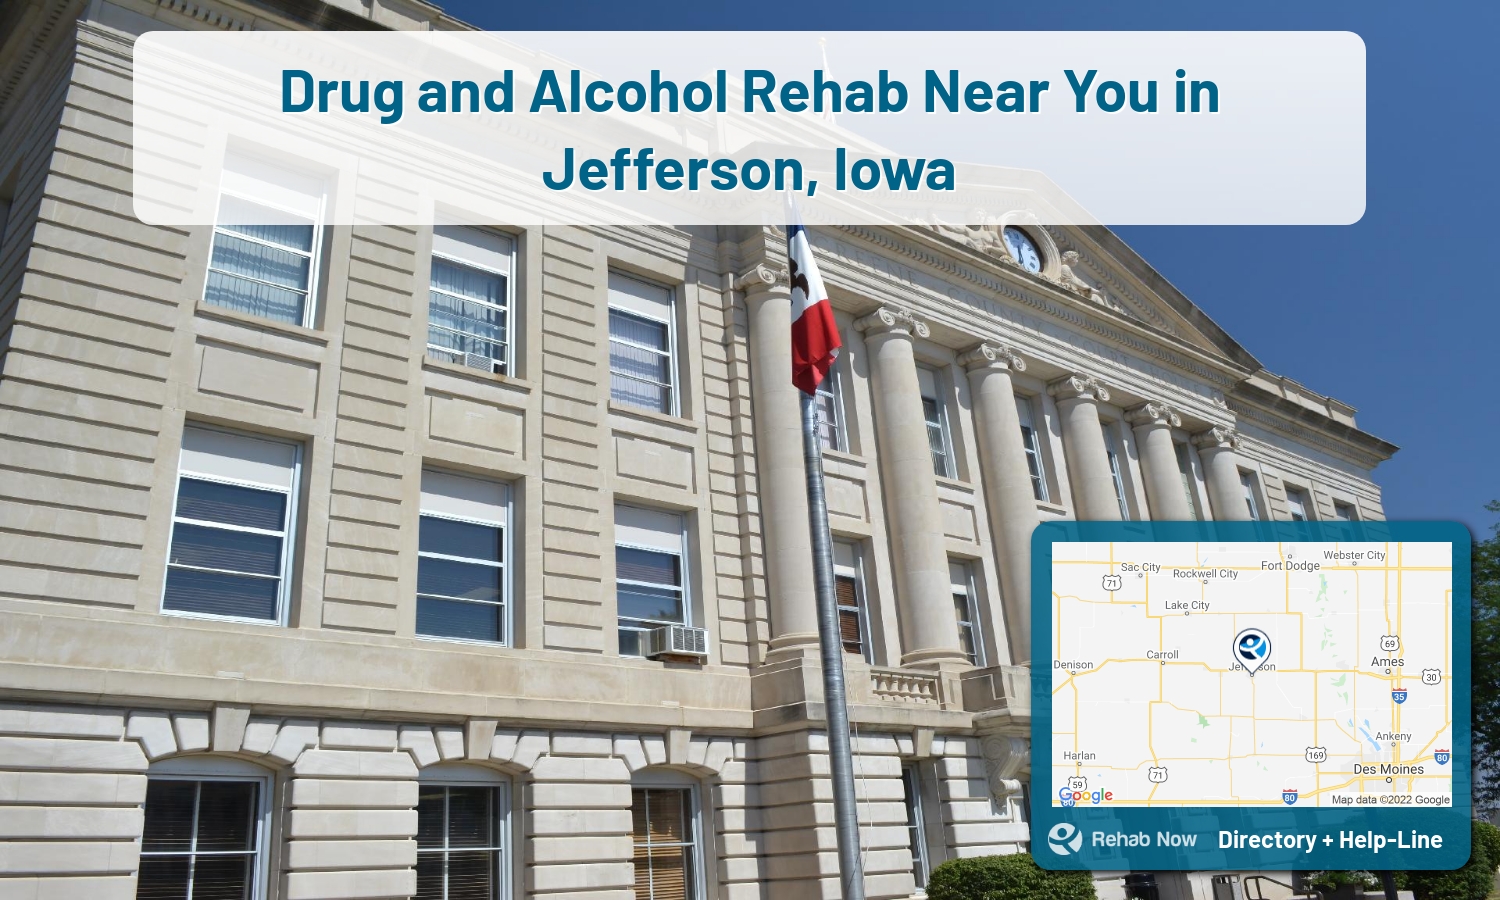 Ready to pick a rehab center in Nicholasville? Get off alcohol, opiates, and other drugs, by selecting top drug rehab centers in Kentucky